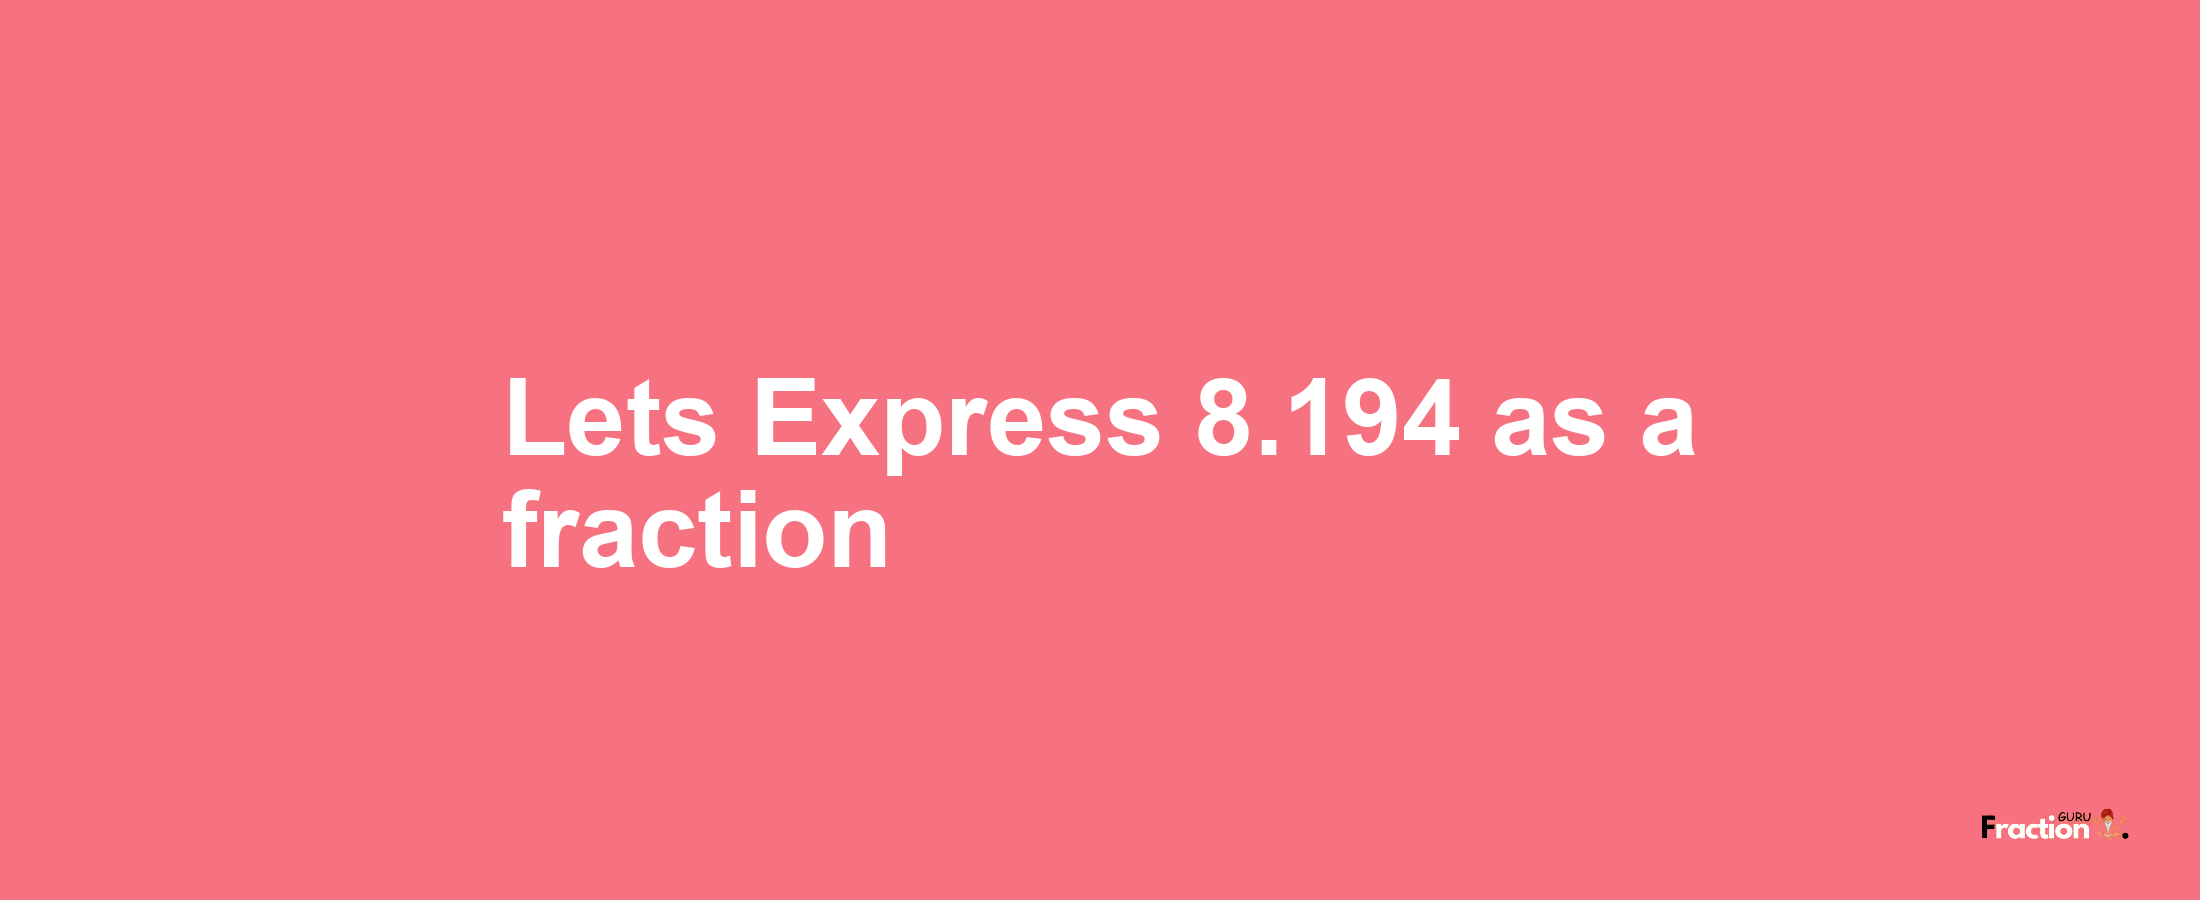 Lets Express 8.194 as afraction